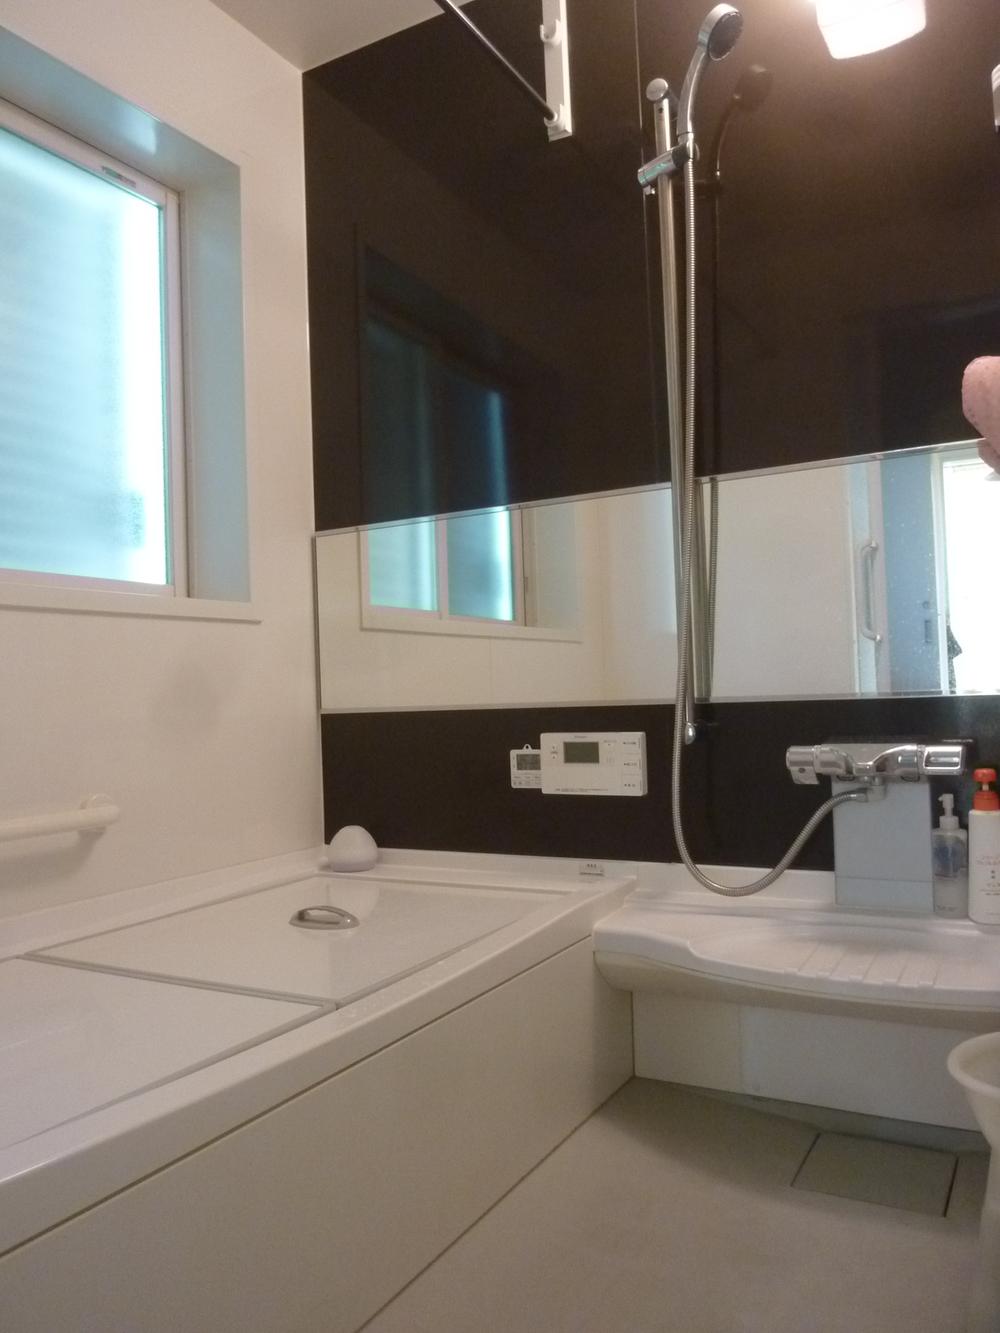 Bathroom. Modern with a clean bathroom for more than one tsubo